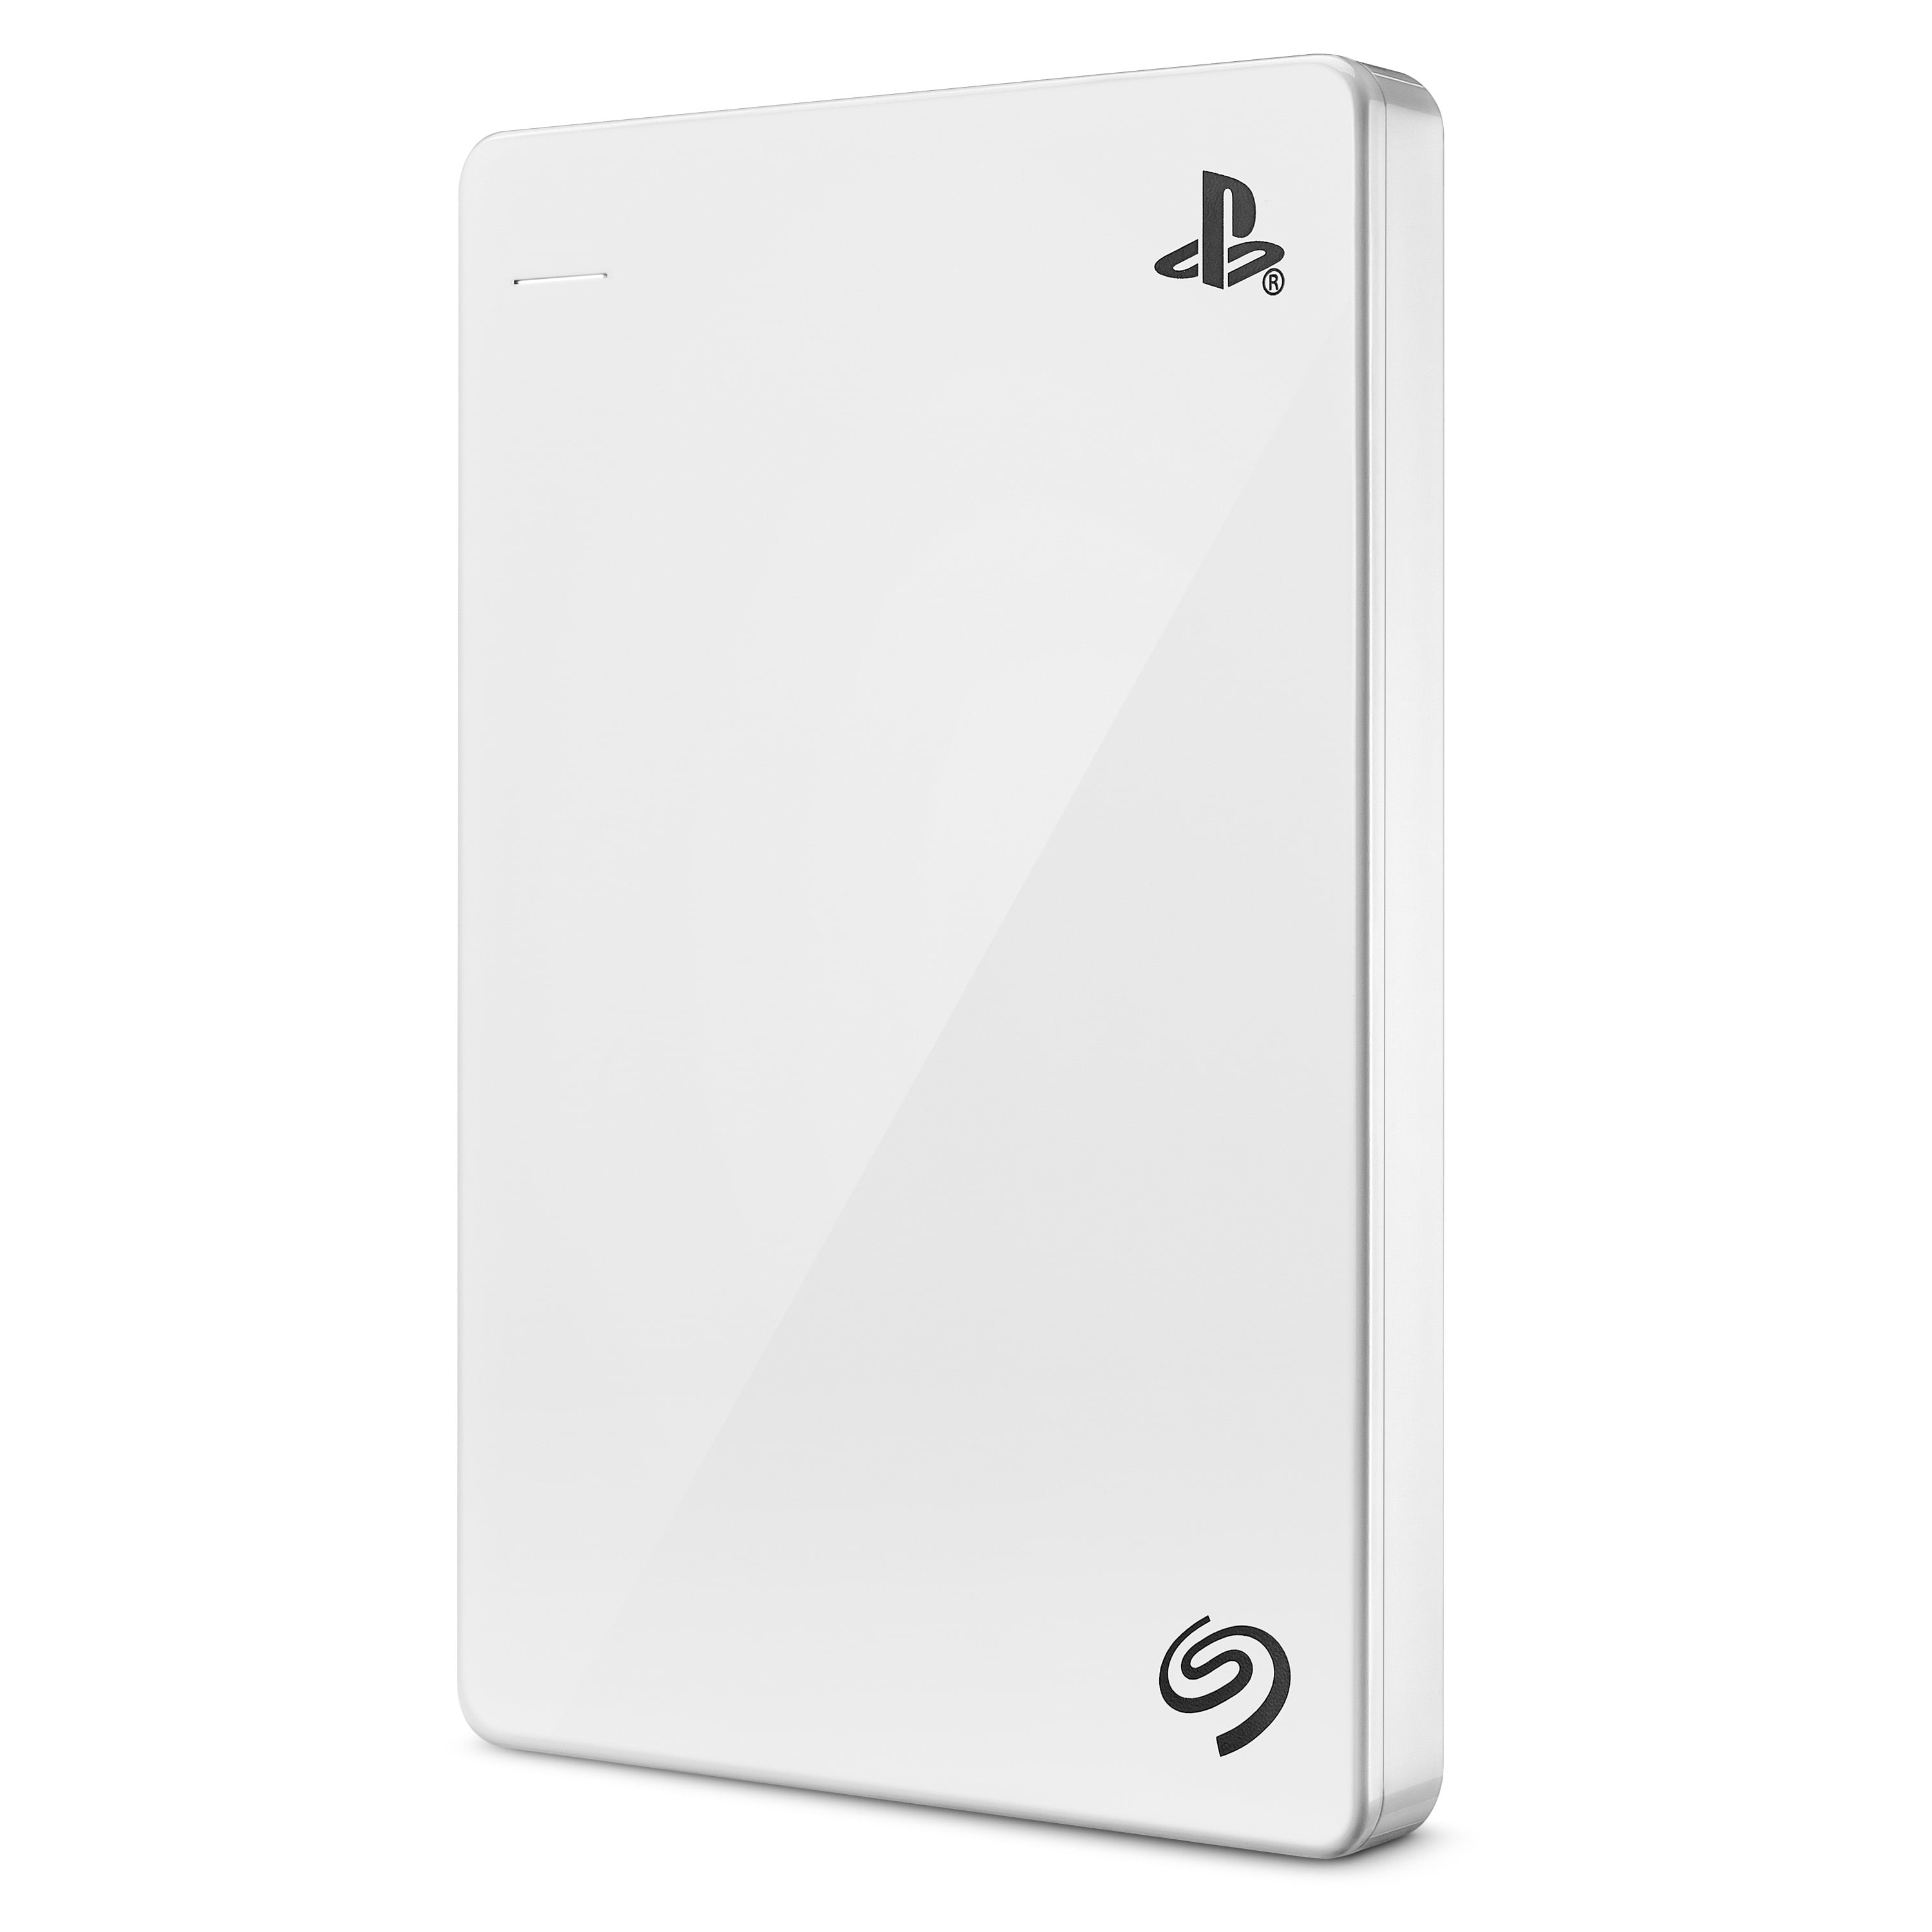 1tb hard disk for ps4